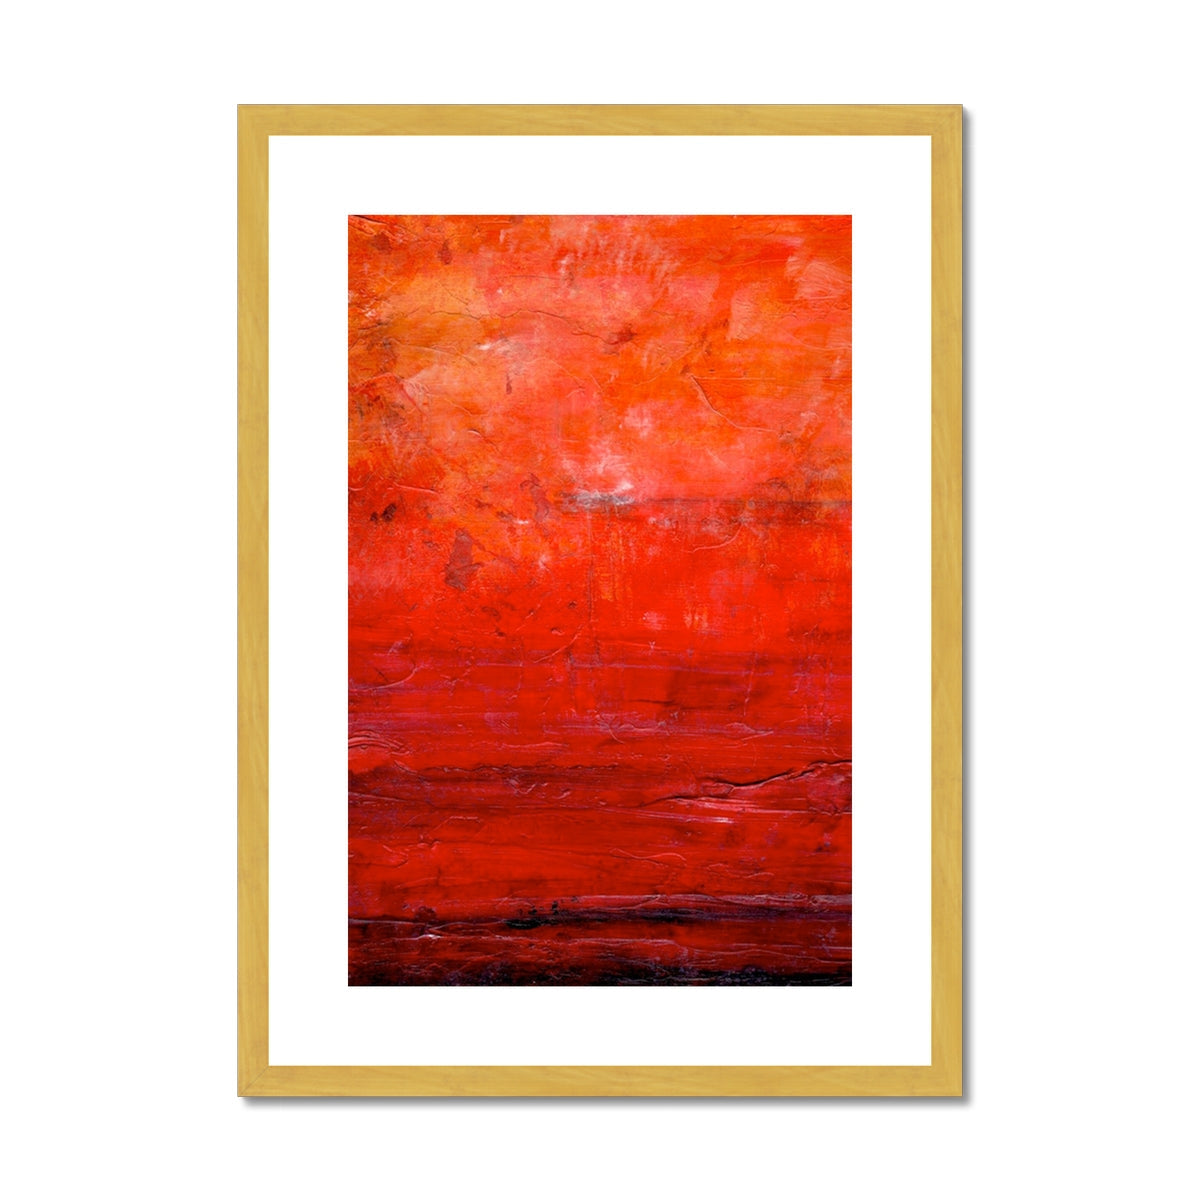 Abstract Summer Painting | Antique Framed & Mounted Prints From Scotland-Antique Framed & Mounted Prints-Abstract & Impressionistic Art Gallery-A2 Portrait-Gold Frame-Paintings, Prints, Homeware, Art Gifts From Scotland By Scottish Artist Kevin Hunter